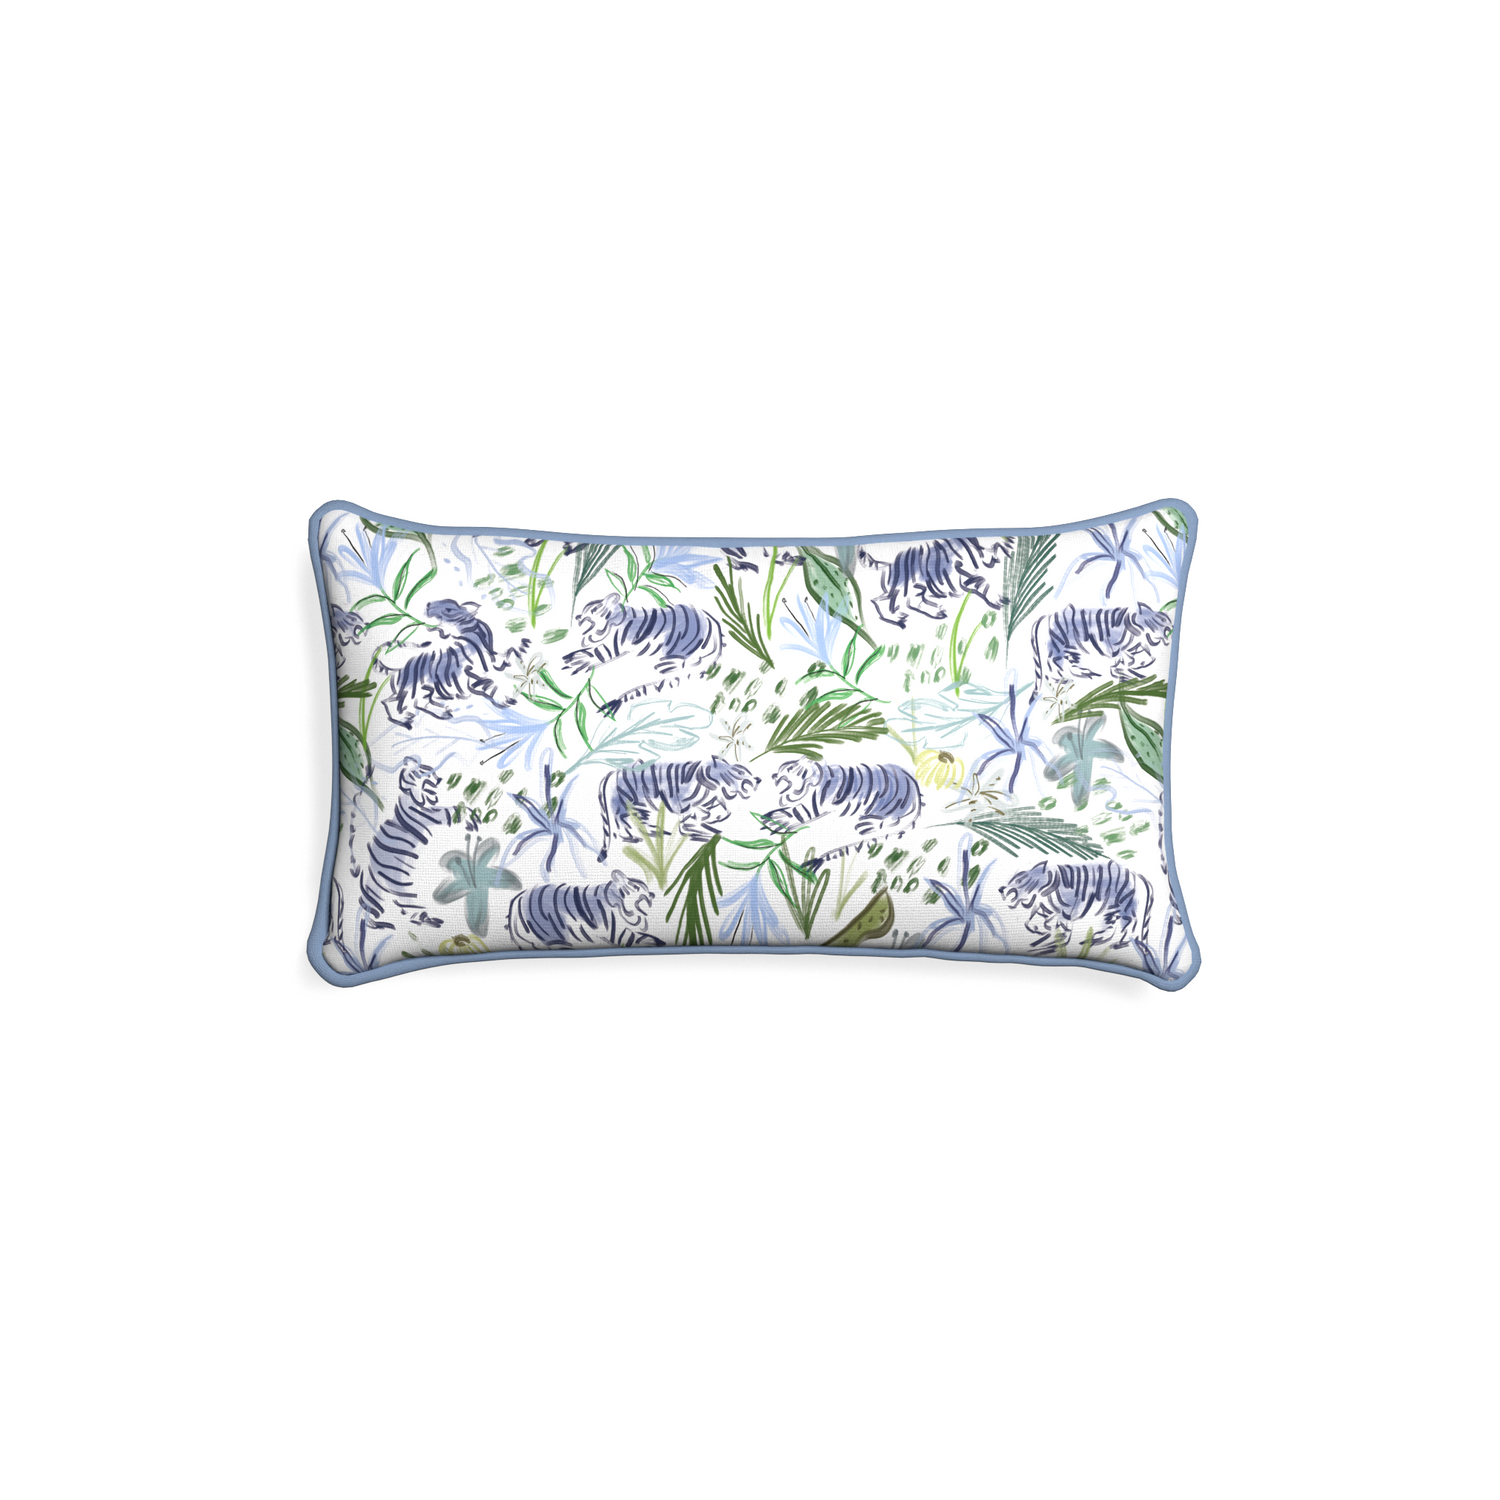 Petite-lumbar frida green custom green tigerpillow with sky piping on white background